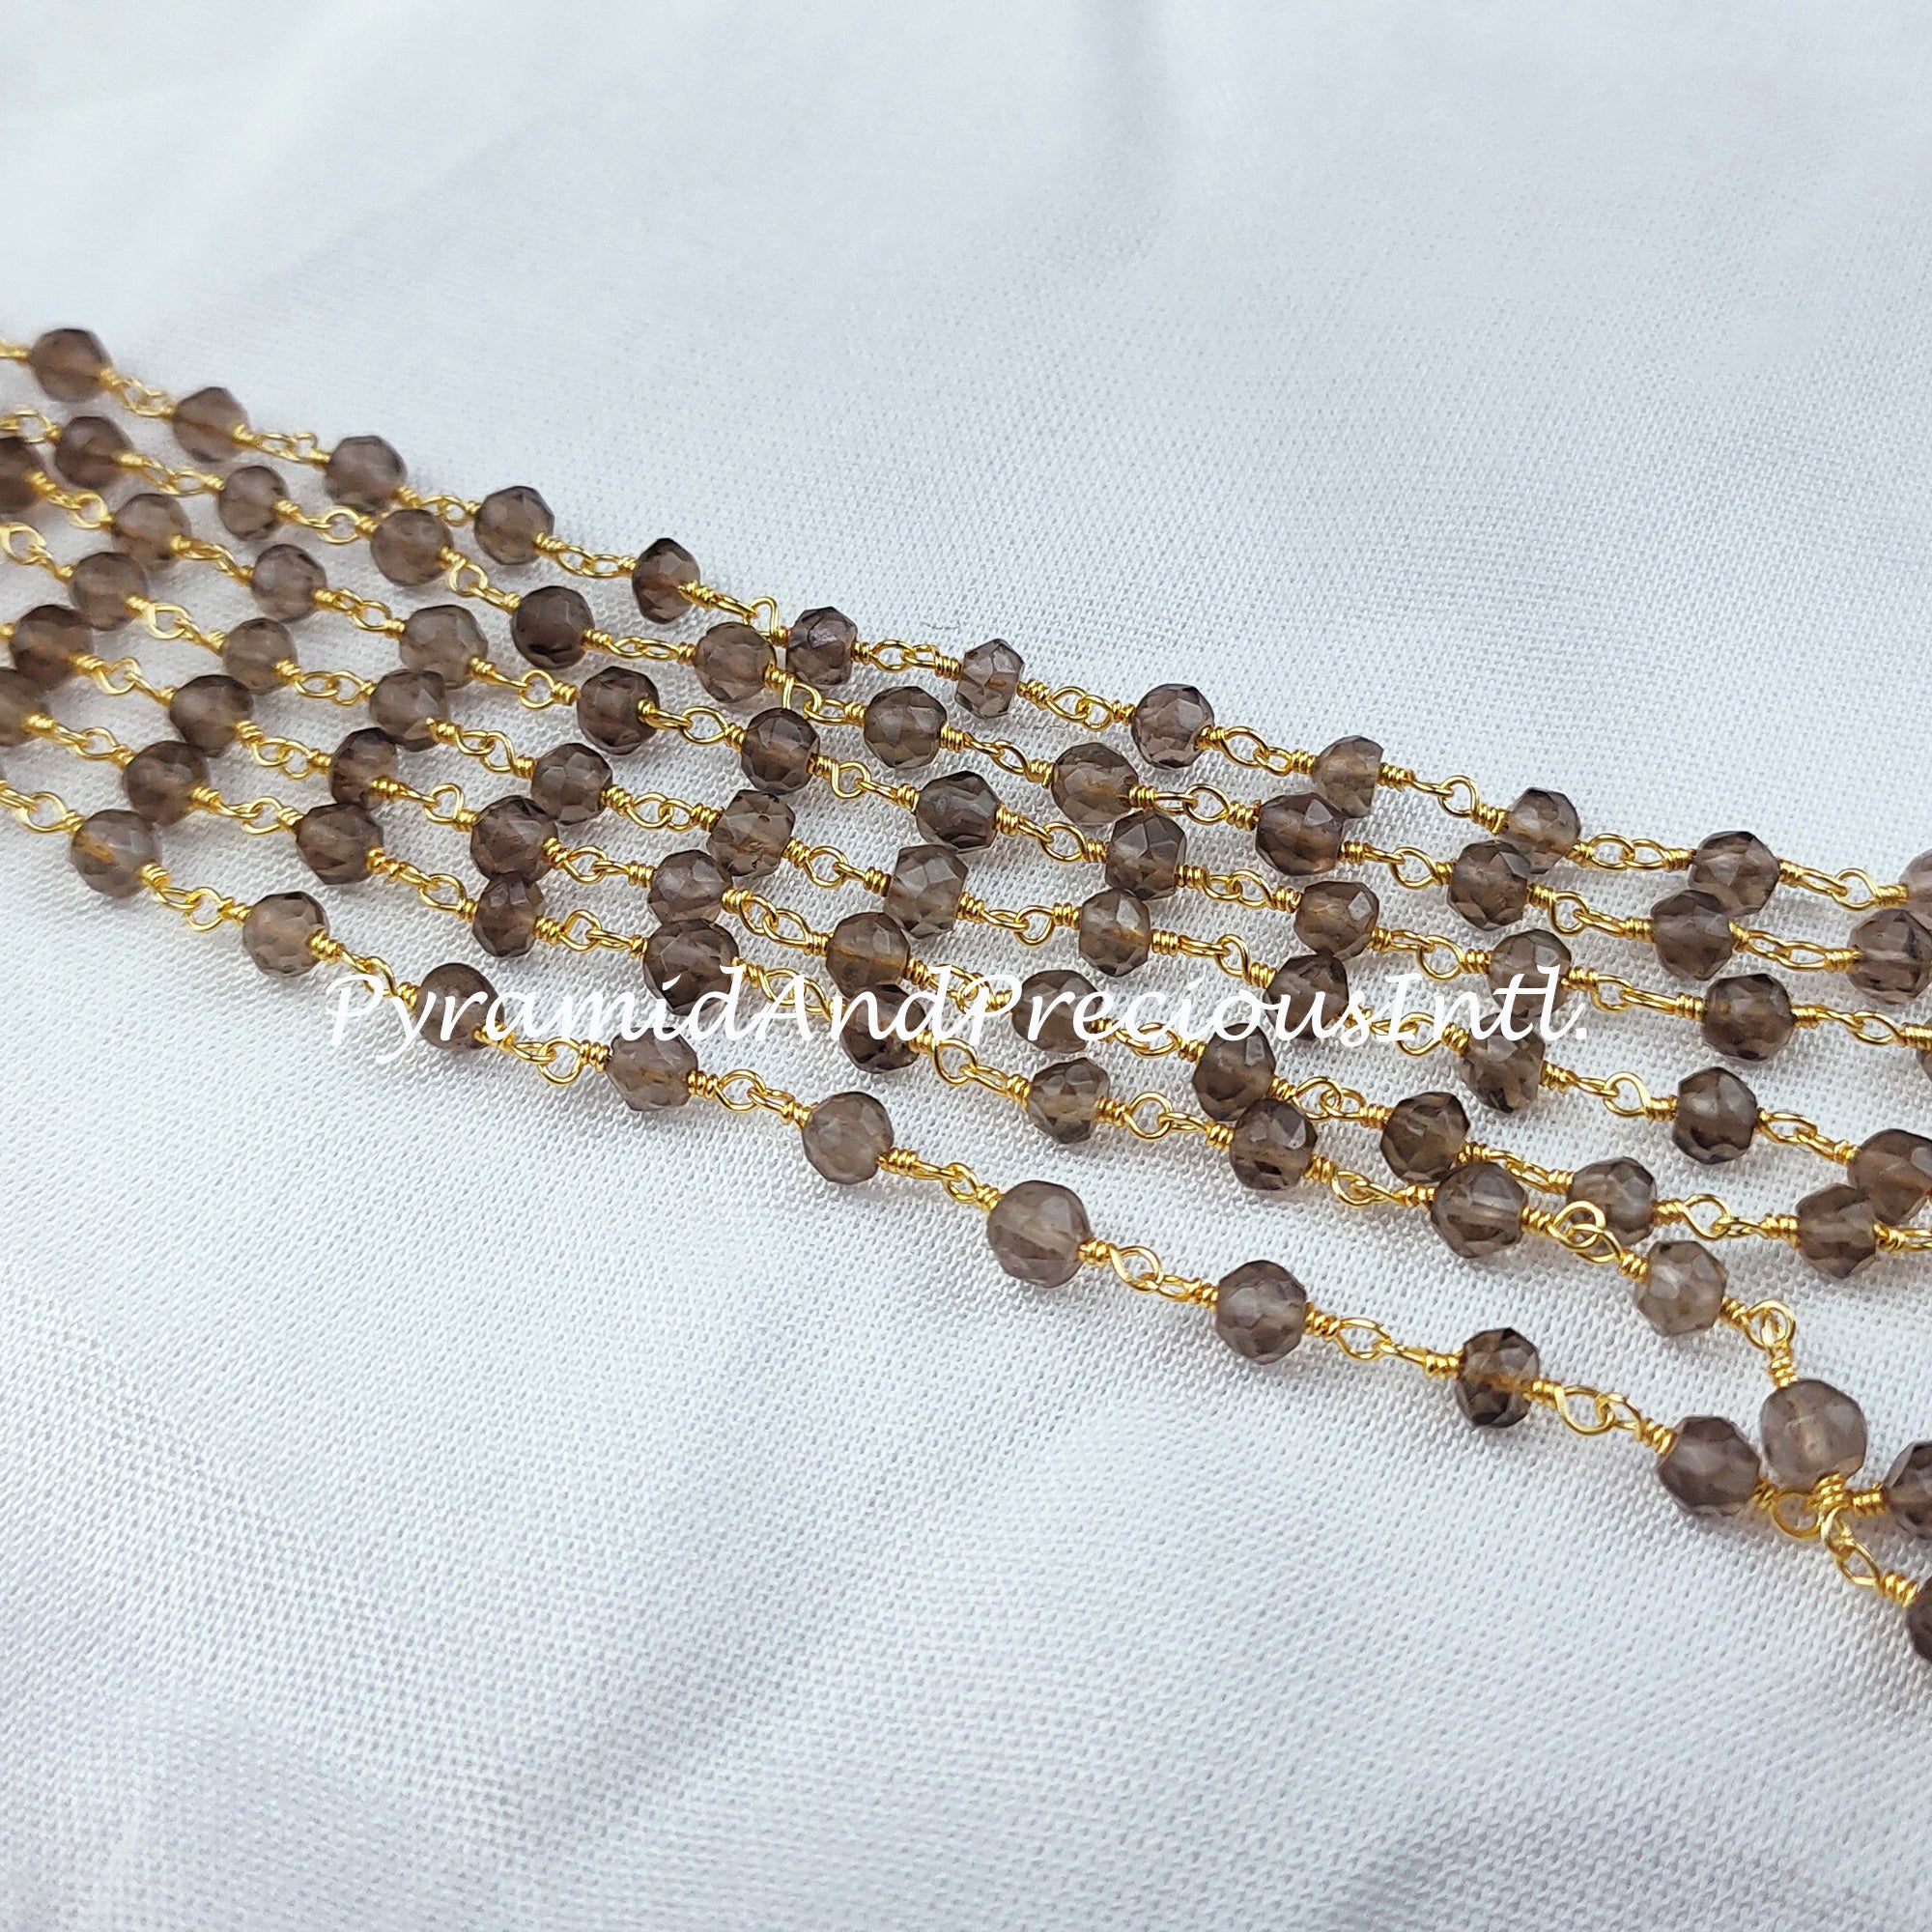 Faceted Smoky Quartz Rosary Chain, Rondelle Beads Chain, Gold Plated Chain, DIY Jewelry Making Supply – SELLING BY FOOT